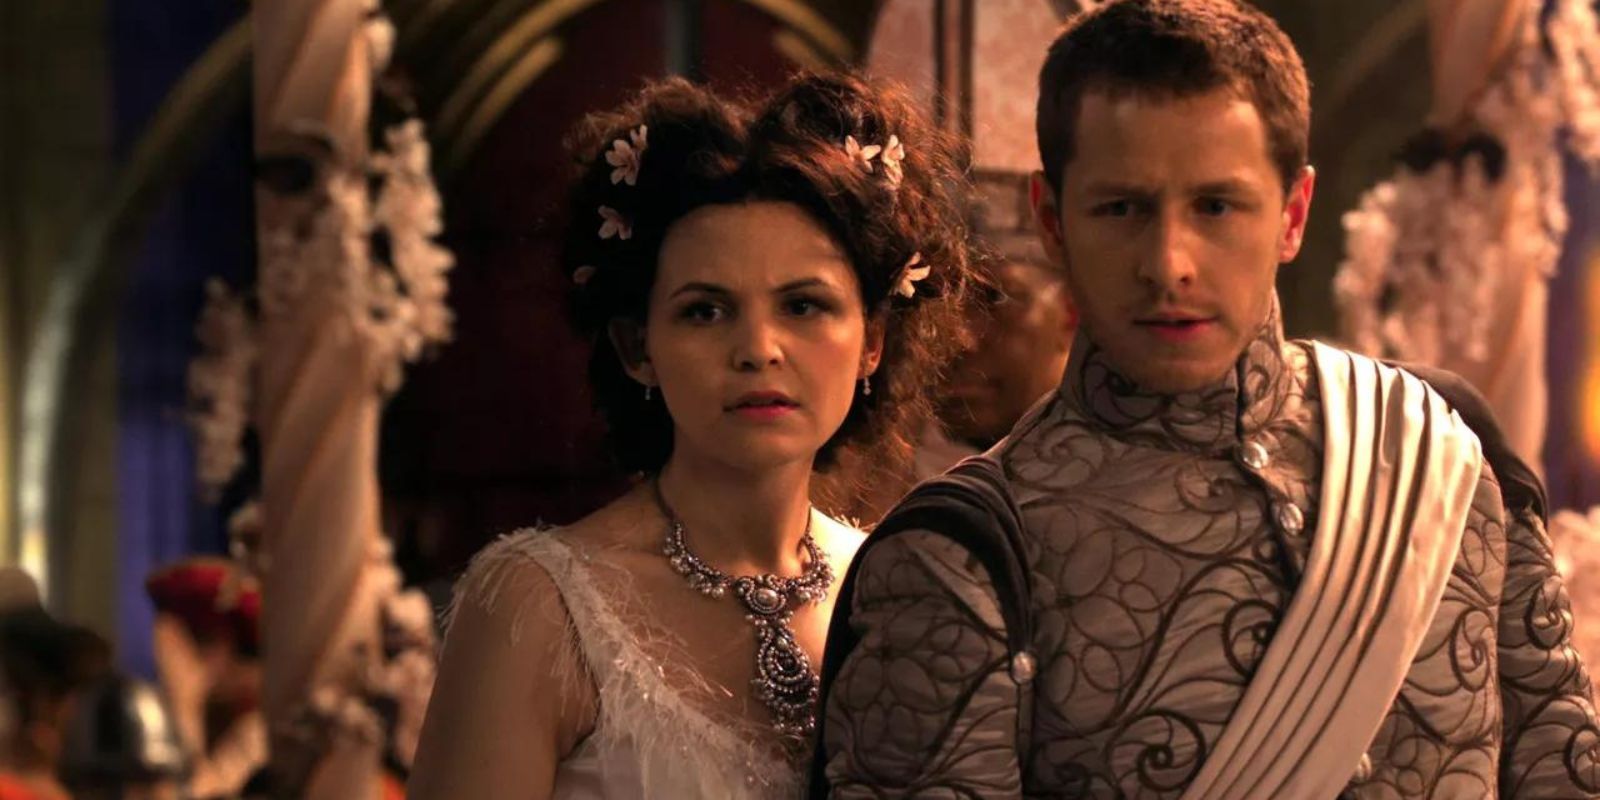 Snow White and Prince Charming on wedding day